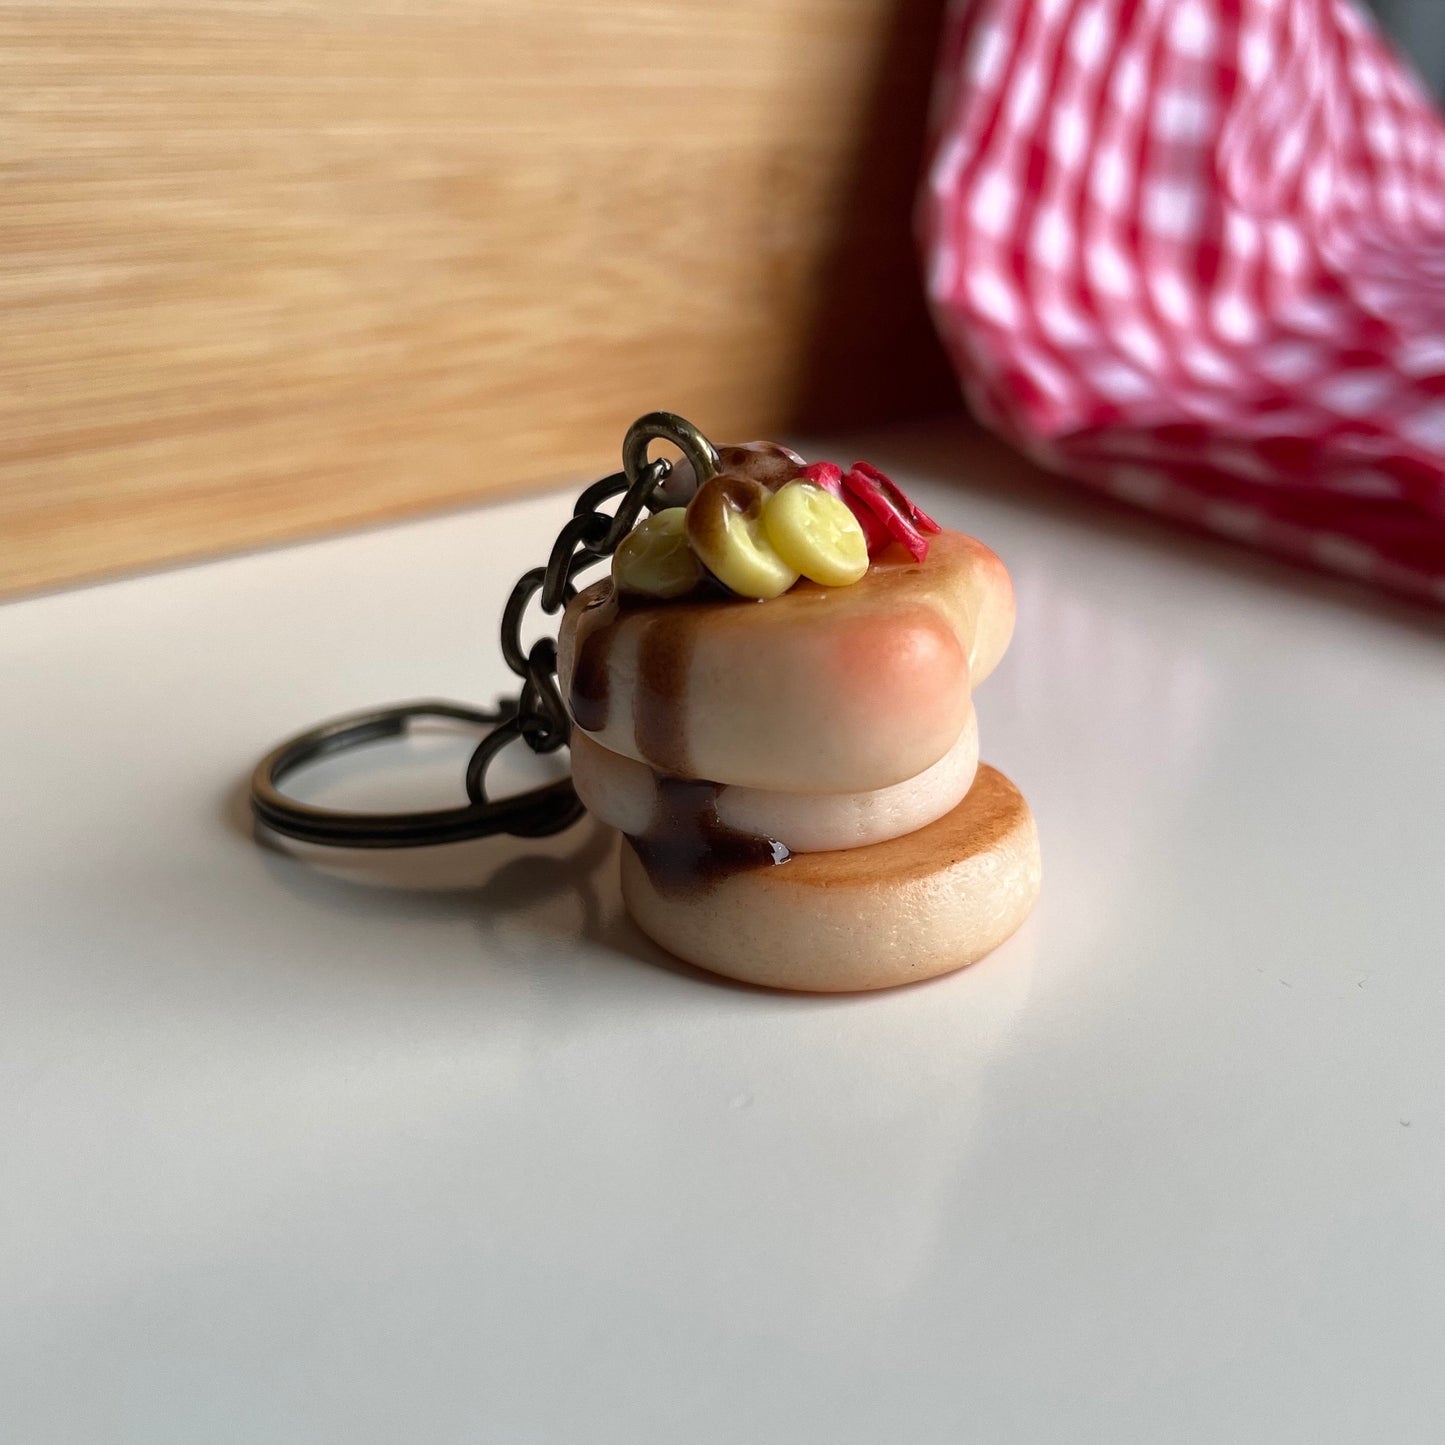 Stacked pancakes keychain, cute pancakes charm, pancakes keyring, novelty keychain, polymerclay charm,clay keyring, miniature realistic food